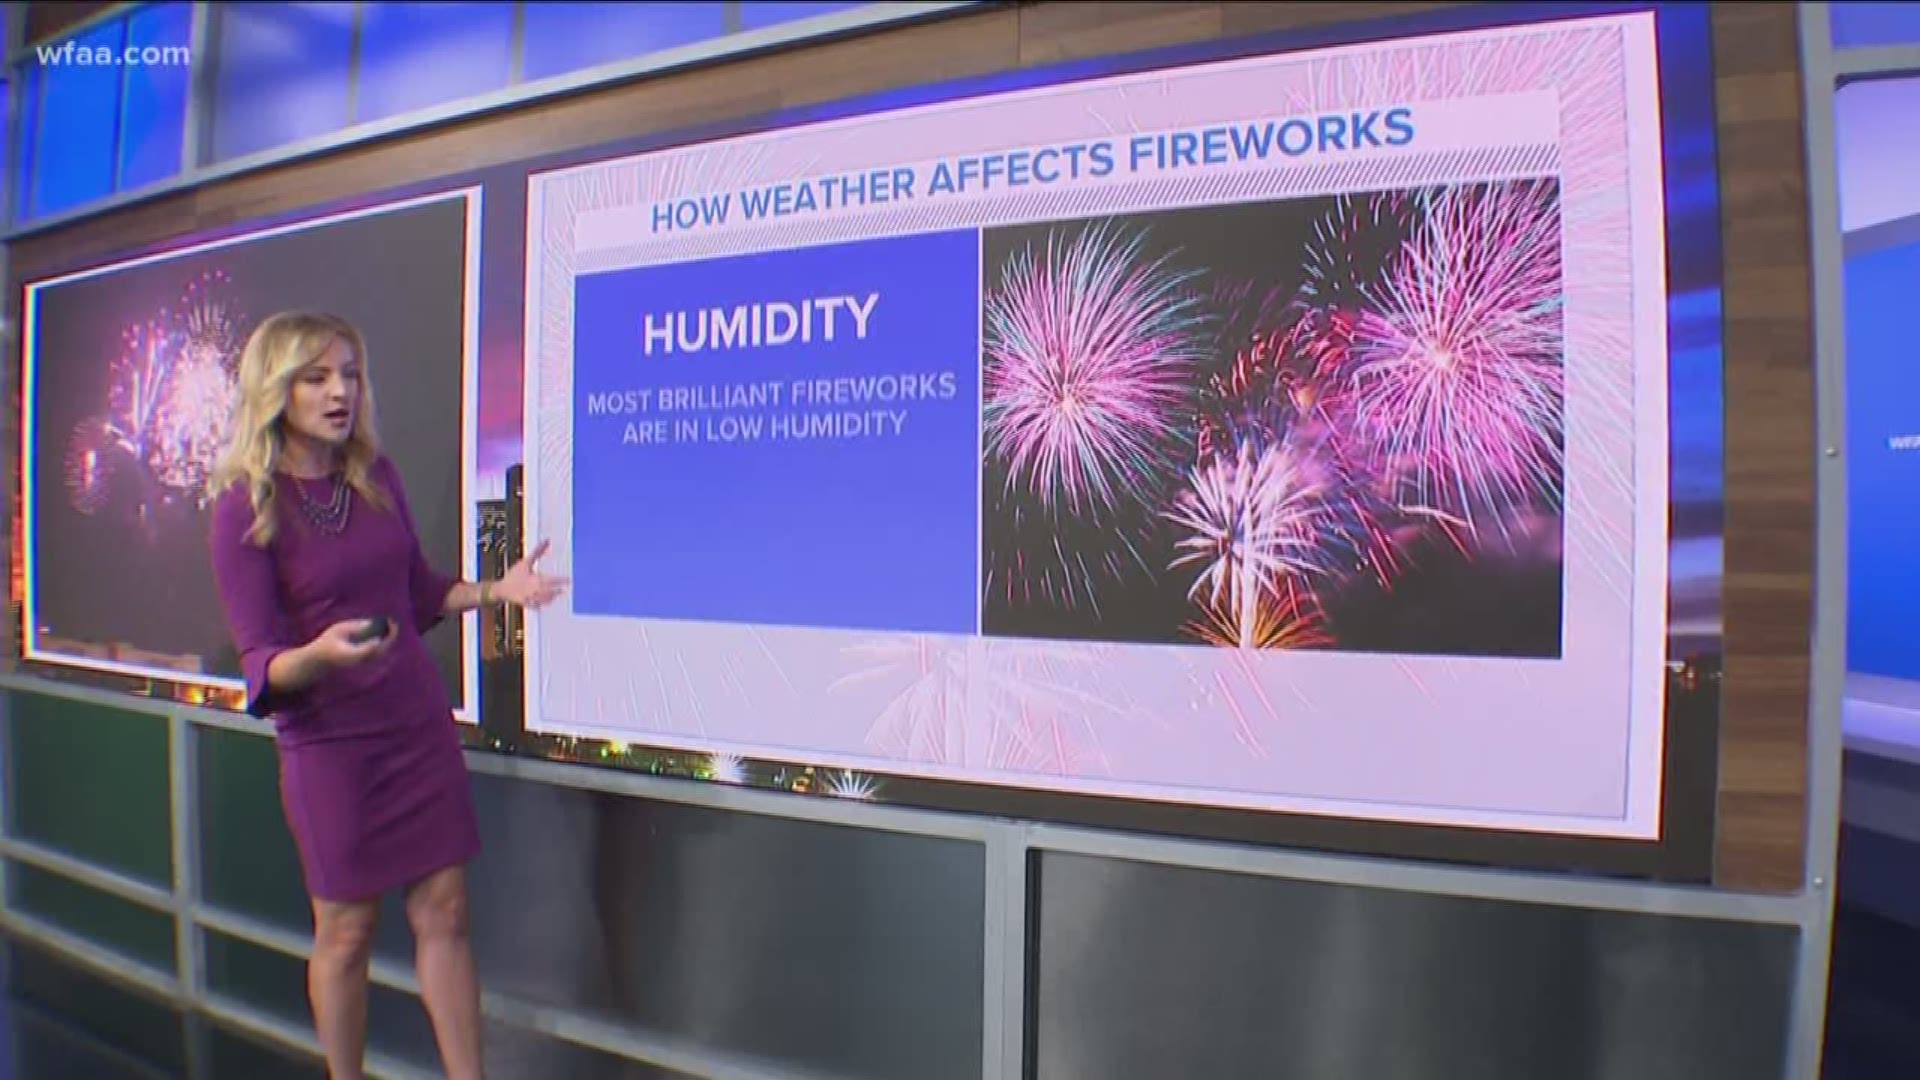 How weather affects fireworks